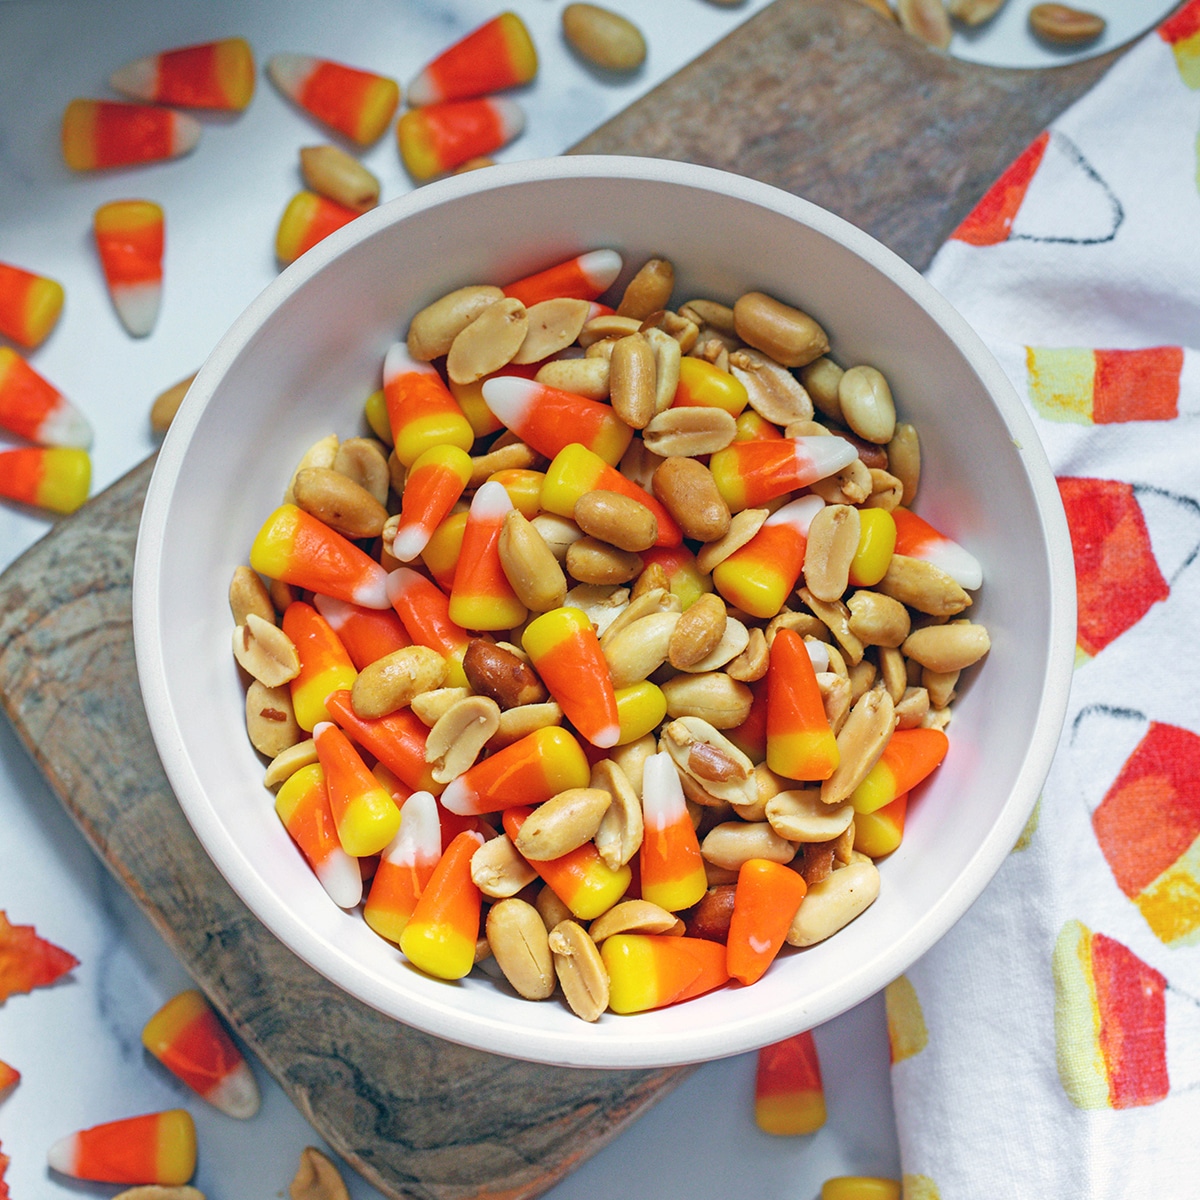 Overhead closeup view of a bowl of candy corn and peanuts.